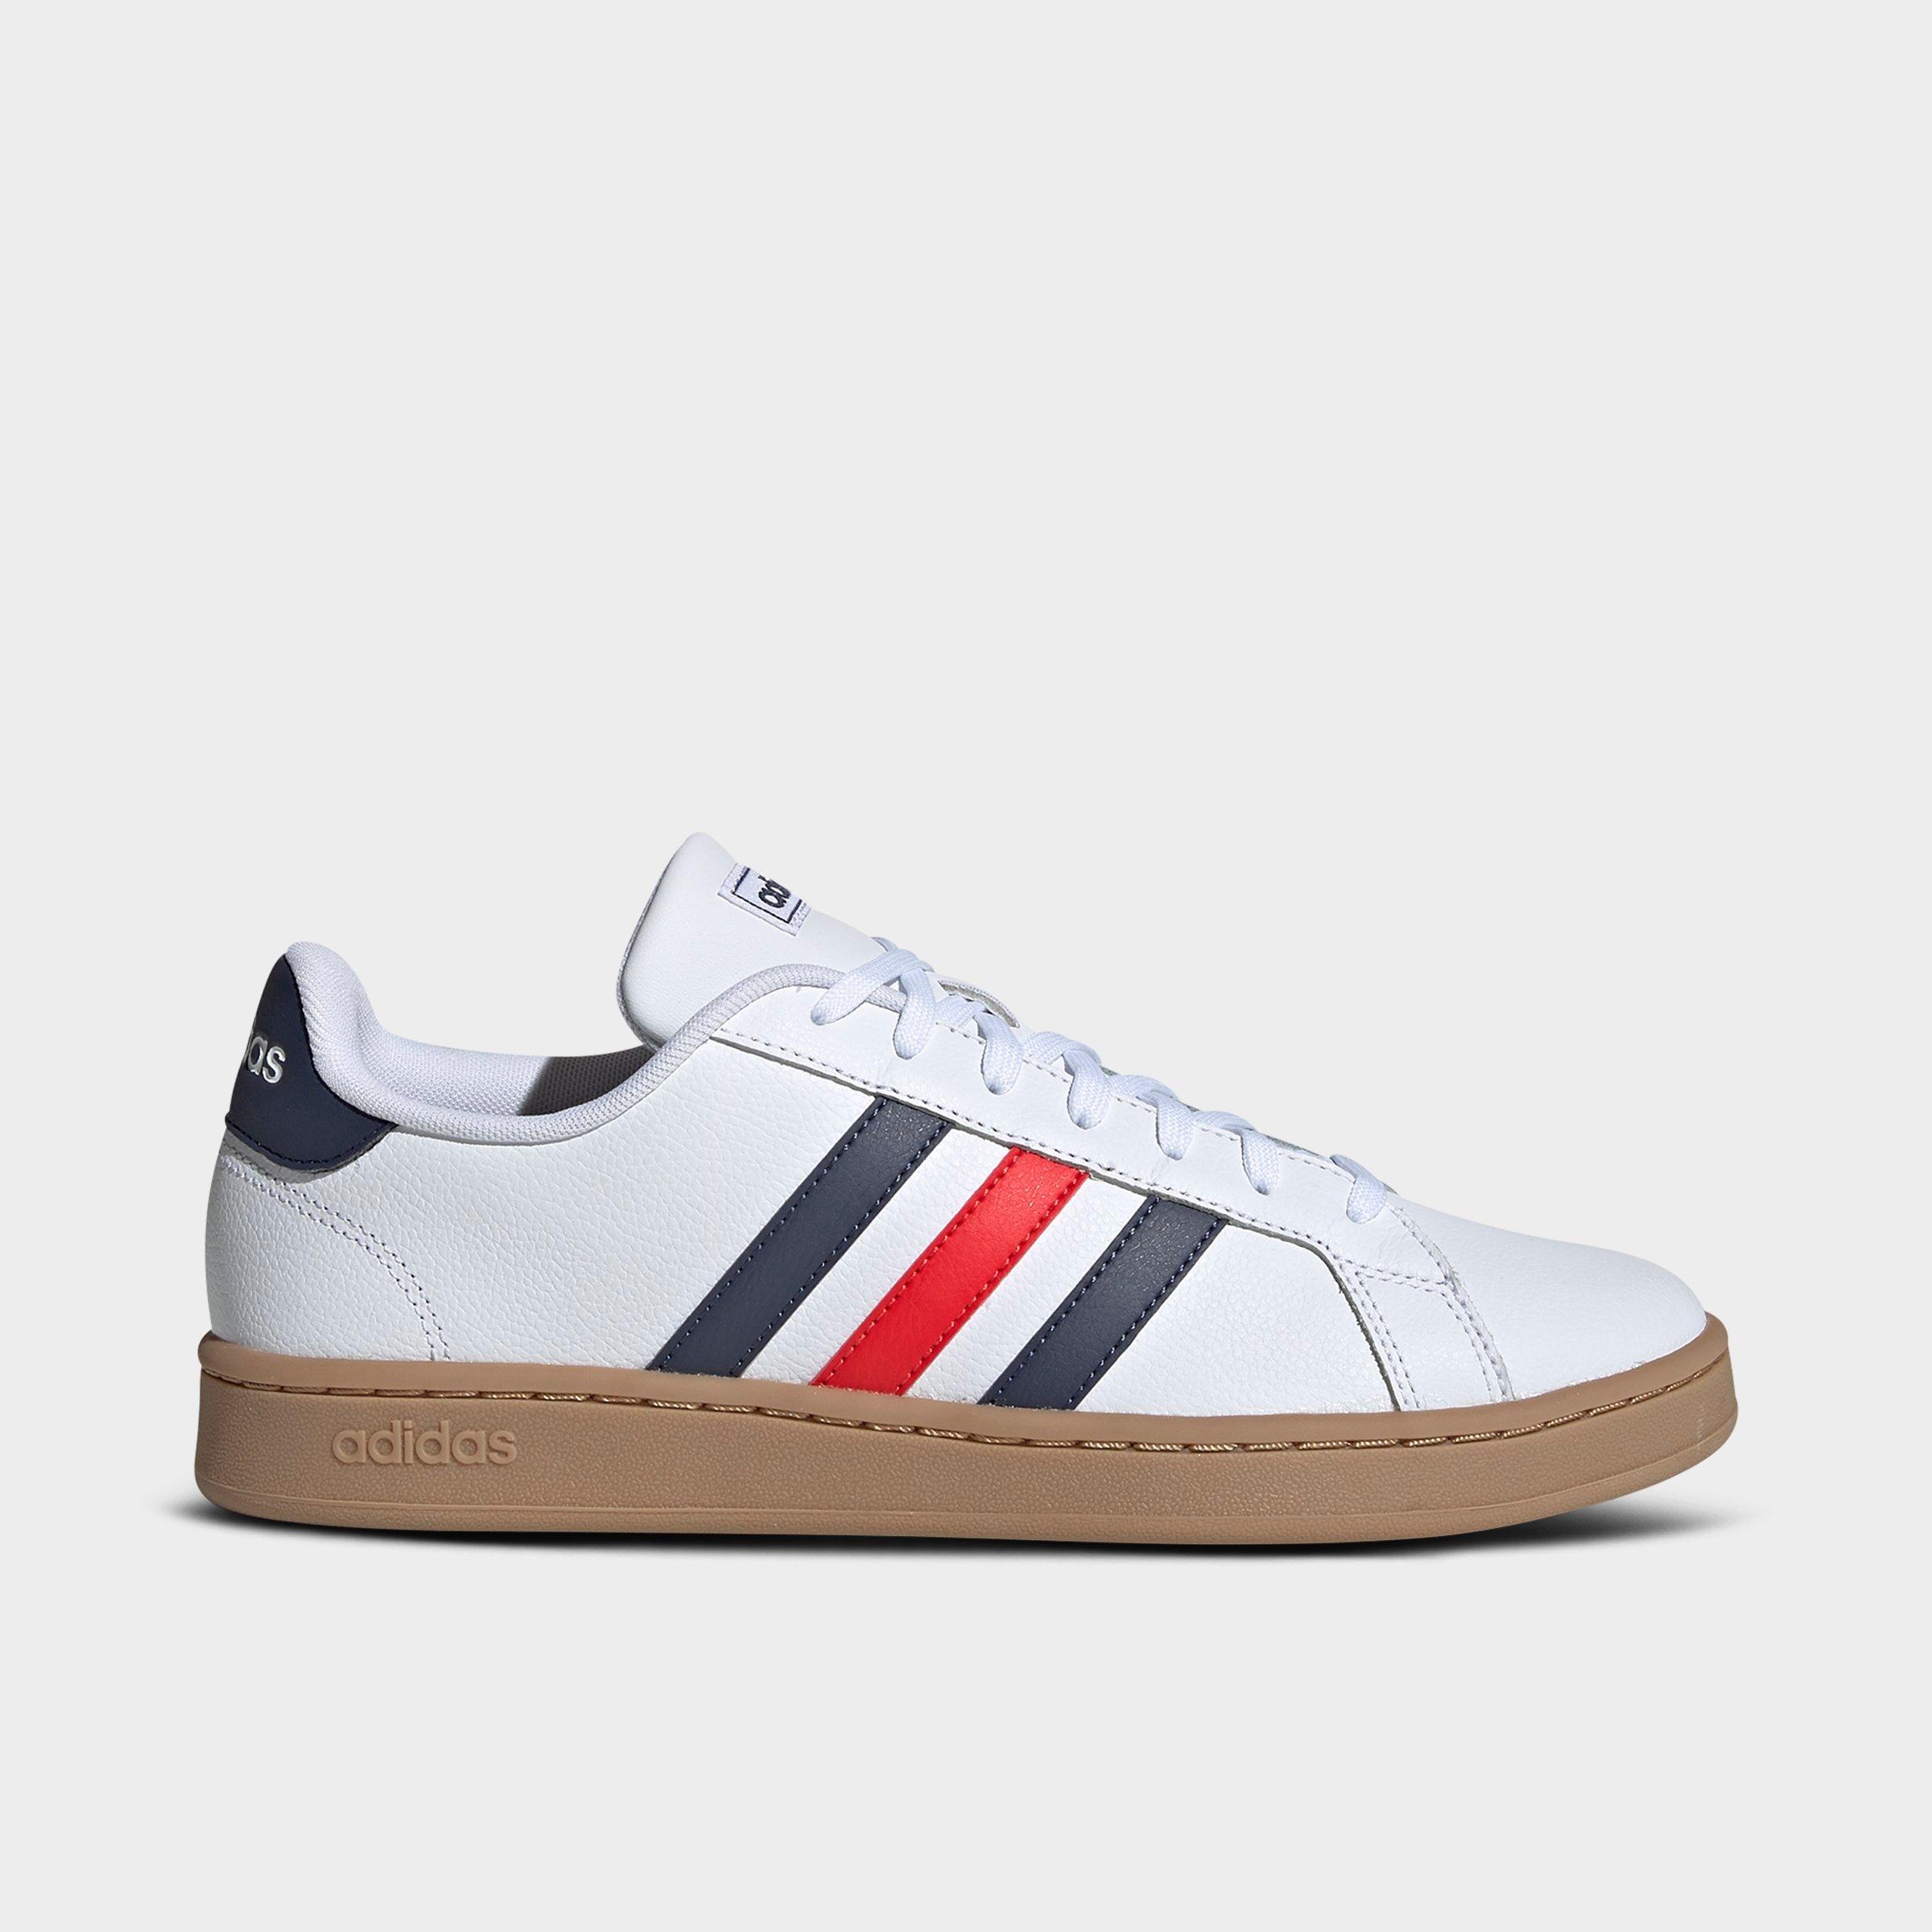 adidas red line shoes